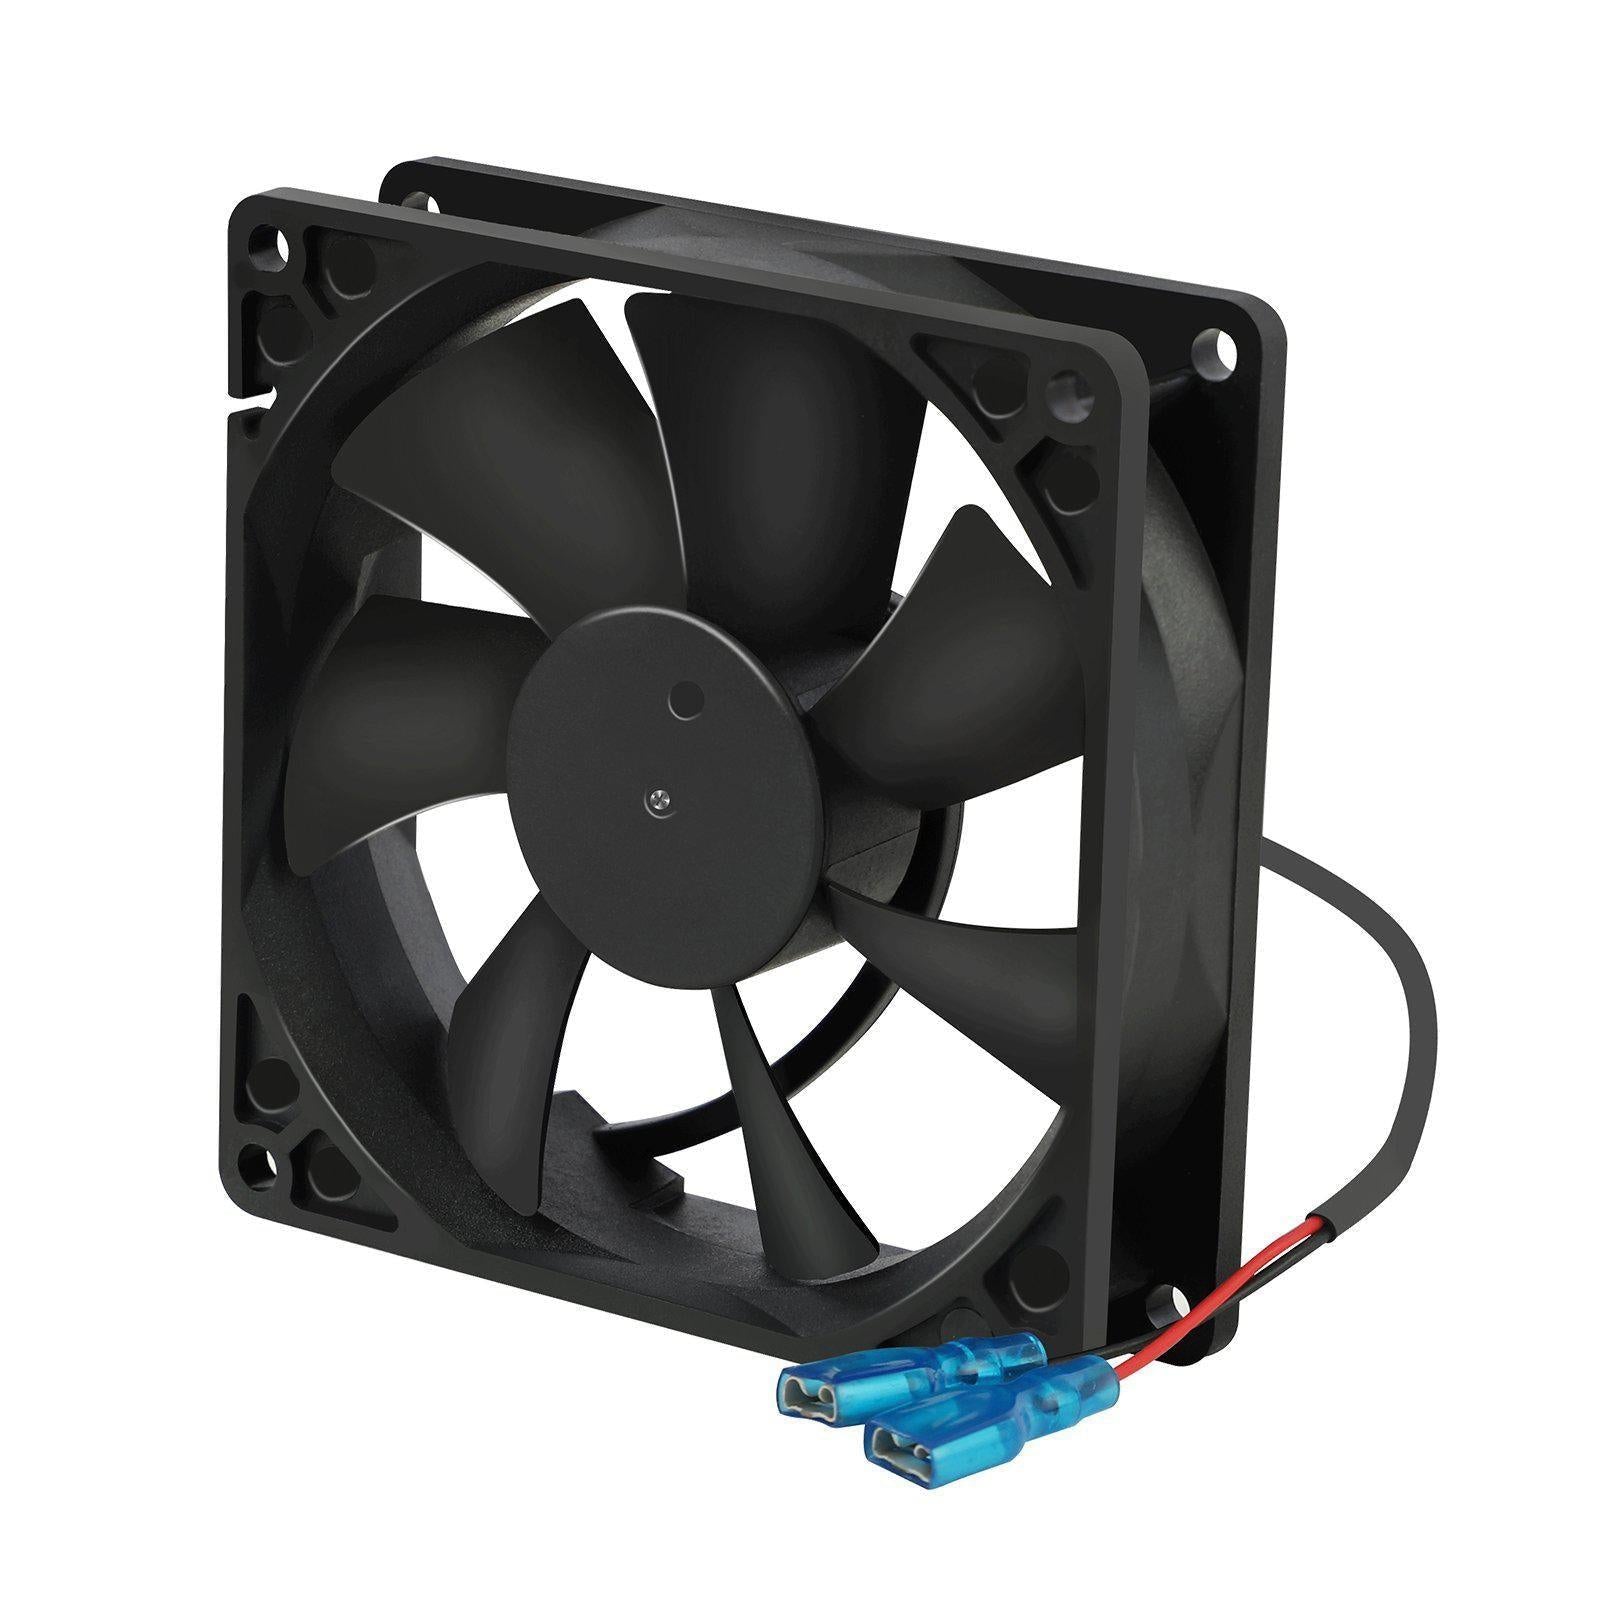 Replacement Fan Parts for JP42 & VL & GO Series - www.icecofreezer.com